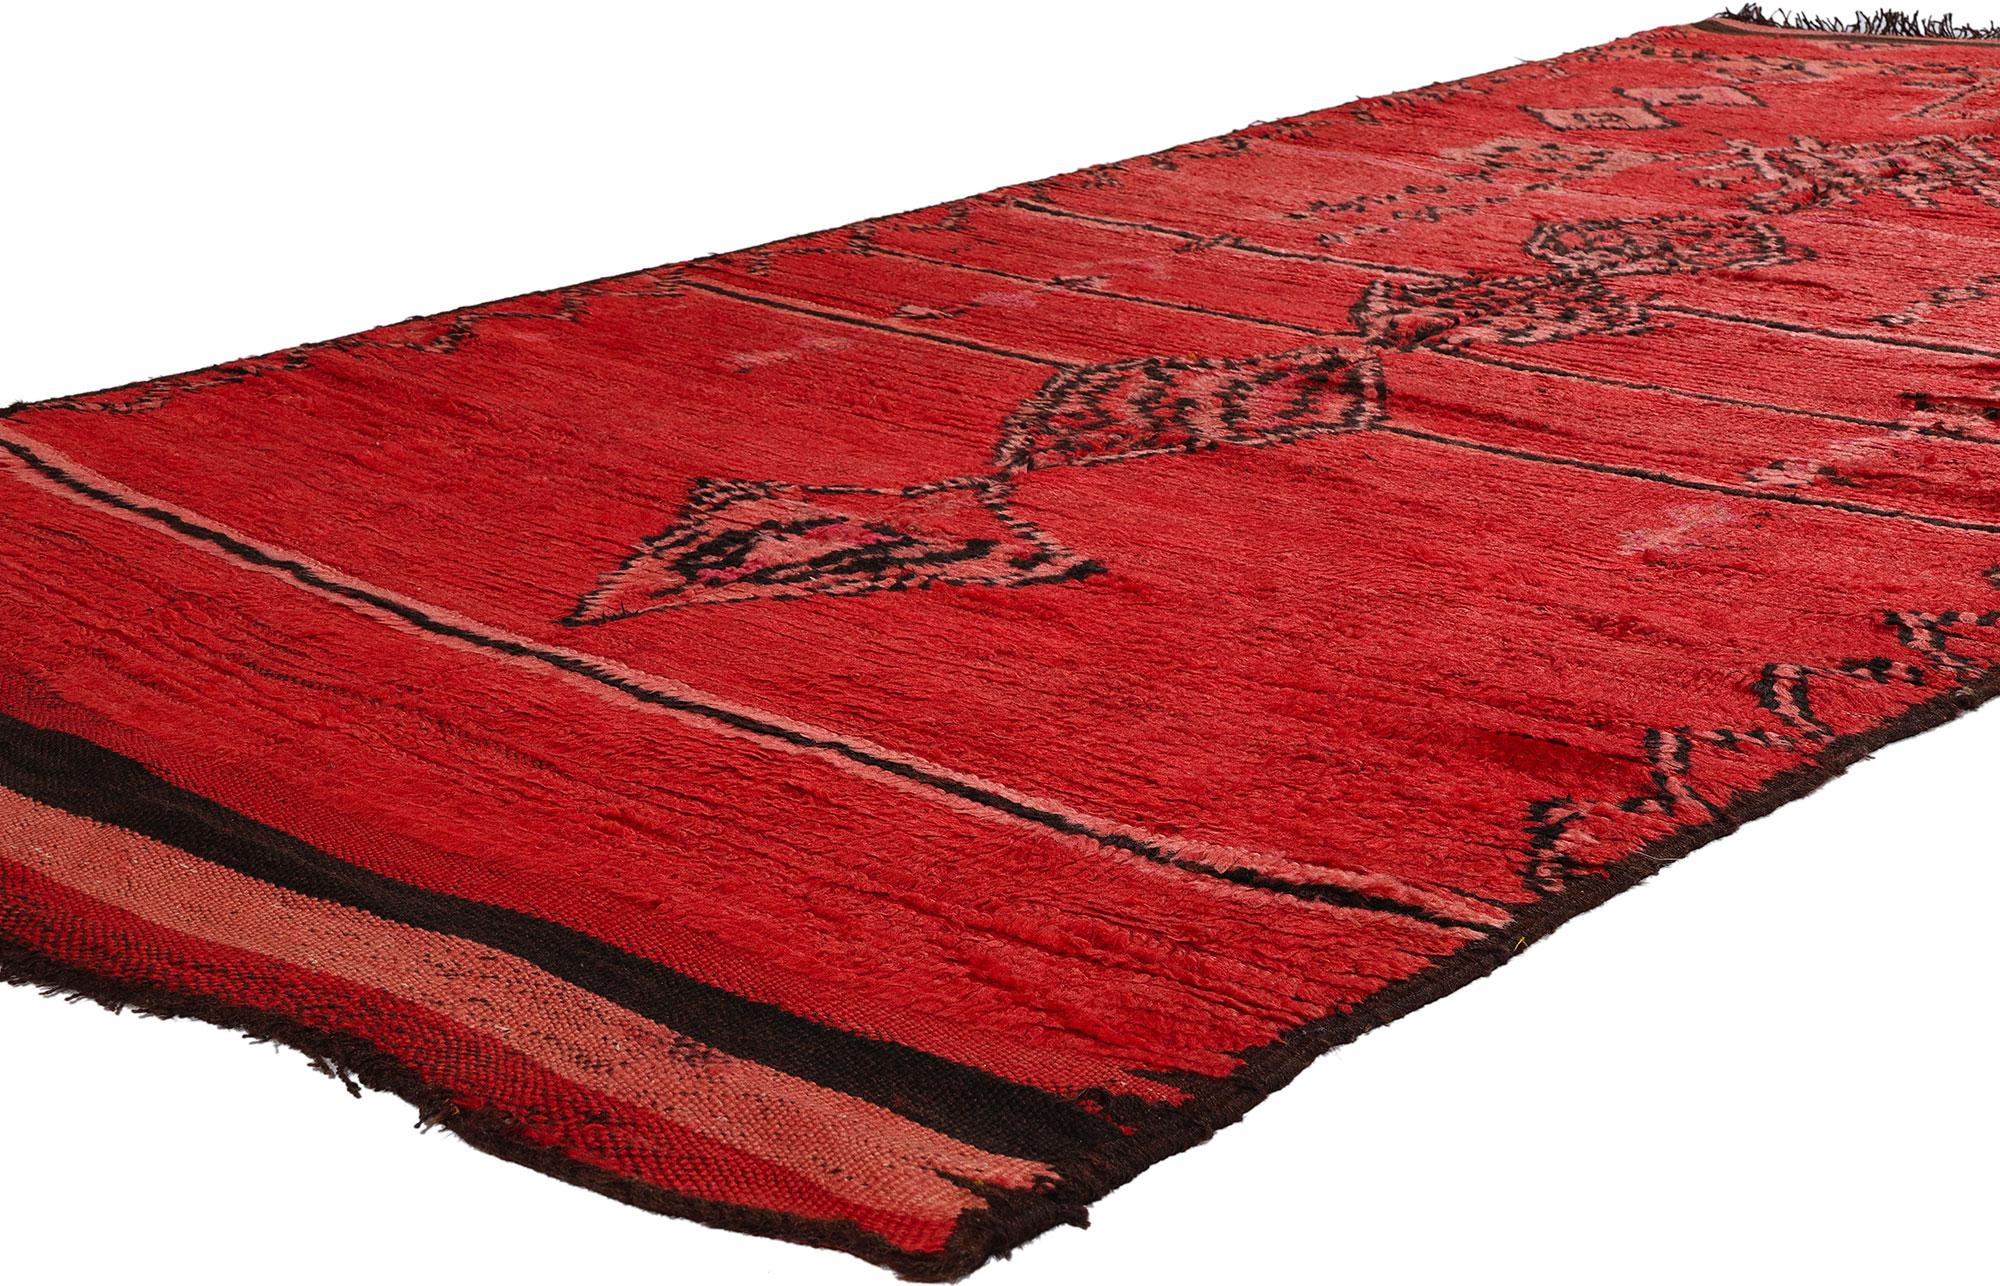 21809 Vintage Red Talsint Moroccan Rug, 04'06 x 11'04. Immerse yourself in the captivating opulence of this hand-knotted wool vintage red Talsint Moroccan rug, originating from the vibrant Figuig region in northeast Morocco, also known as Aït Bou